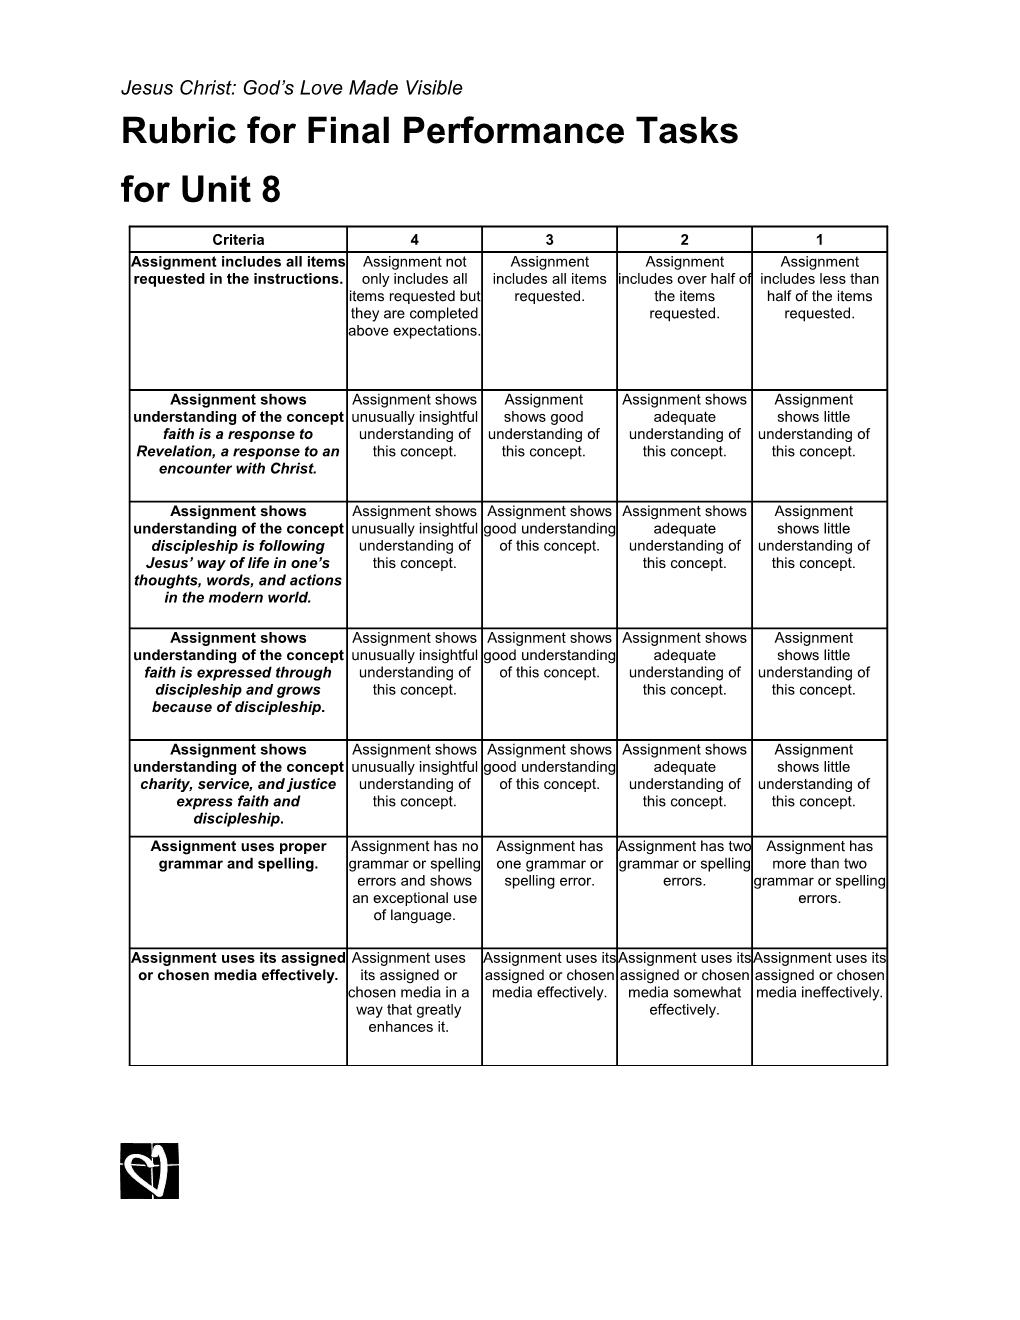 Rubric for Final Performance Tasks for Unit 8Page 1